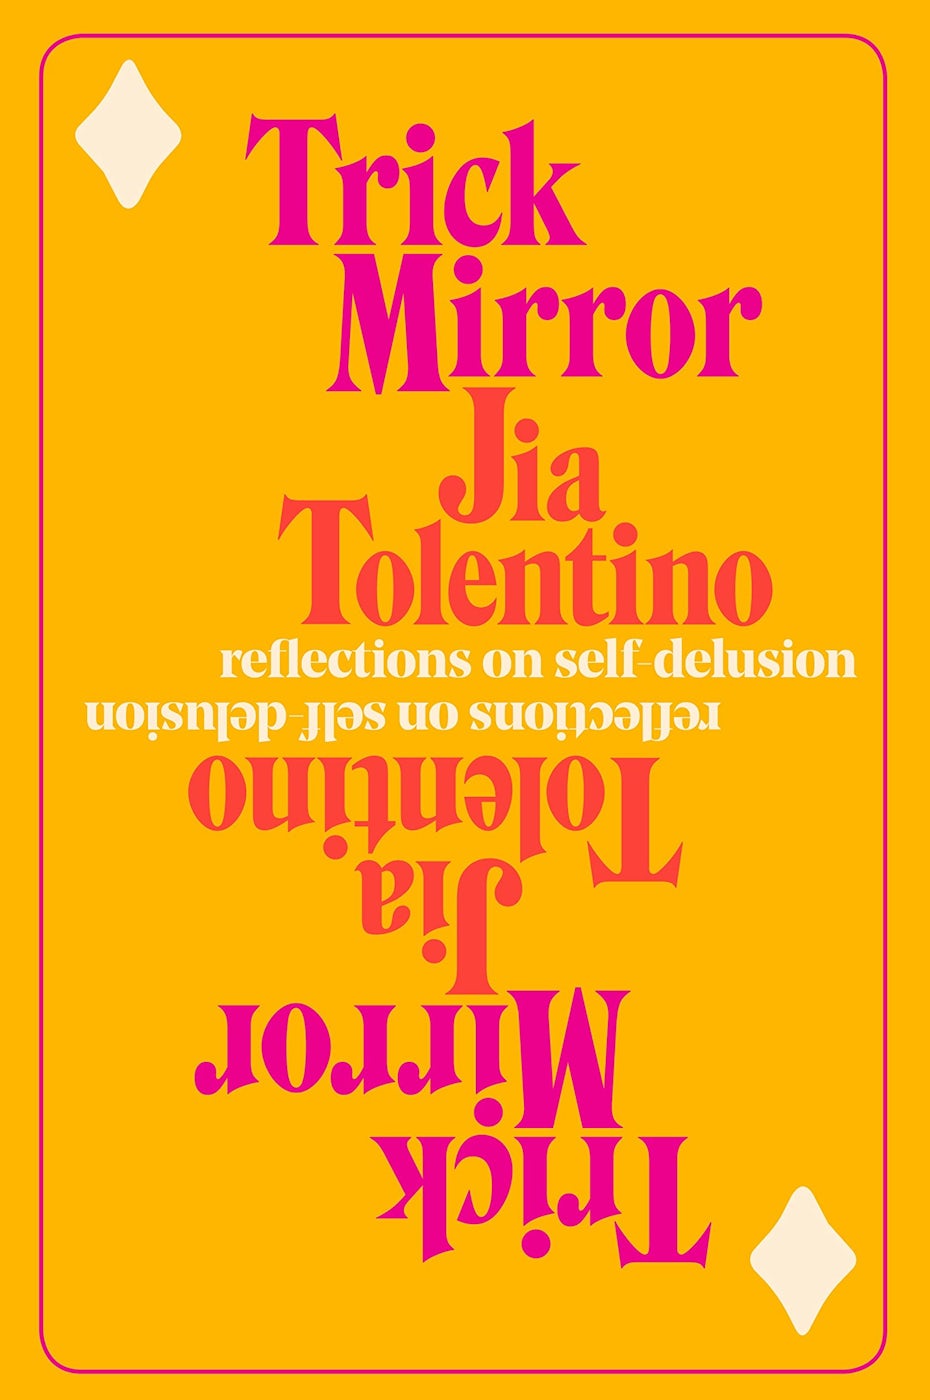 Book cover trends 2020 example with mirrored, pink type